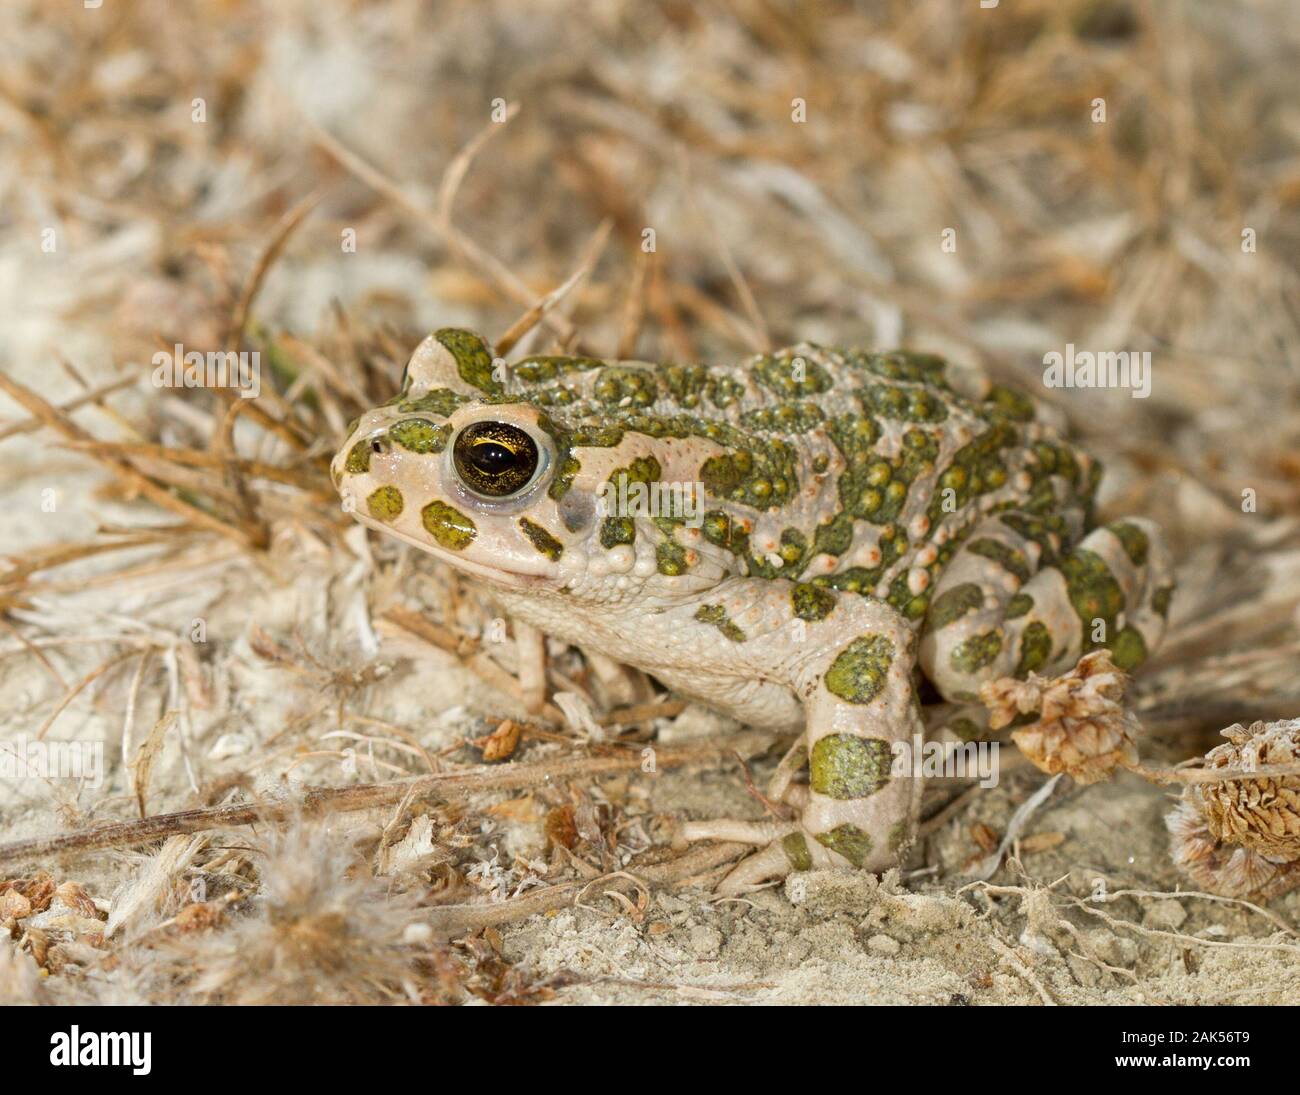 The Green Toad - Bufo viridis. A common nocturnal hunter in a range of habitats around the Mediterranean. Stock Photo